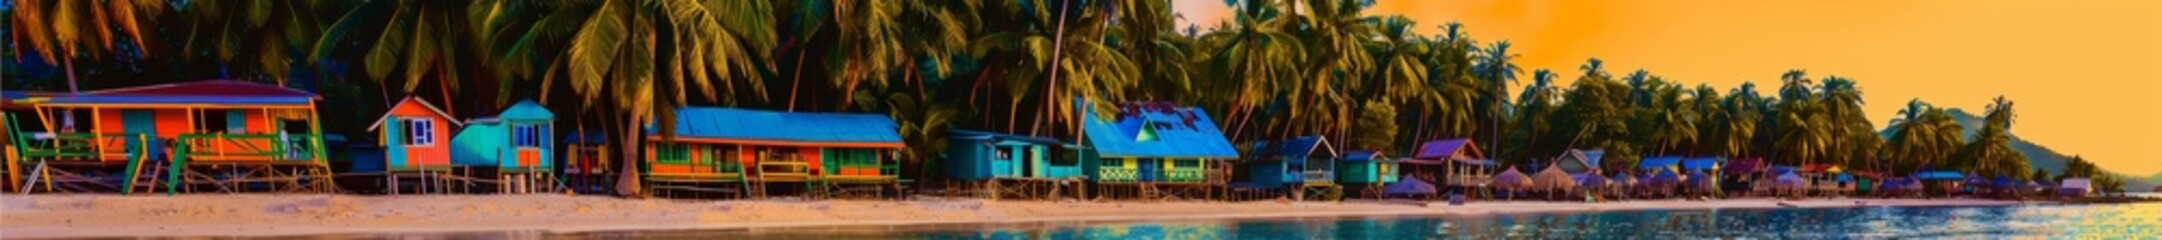 A tropical island beach at sunset, with colorful beach huts lining the shore and palm trees swaying in the breeze. The vibrant colors of the sky reflect off the clear blue water, creating a magical